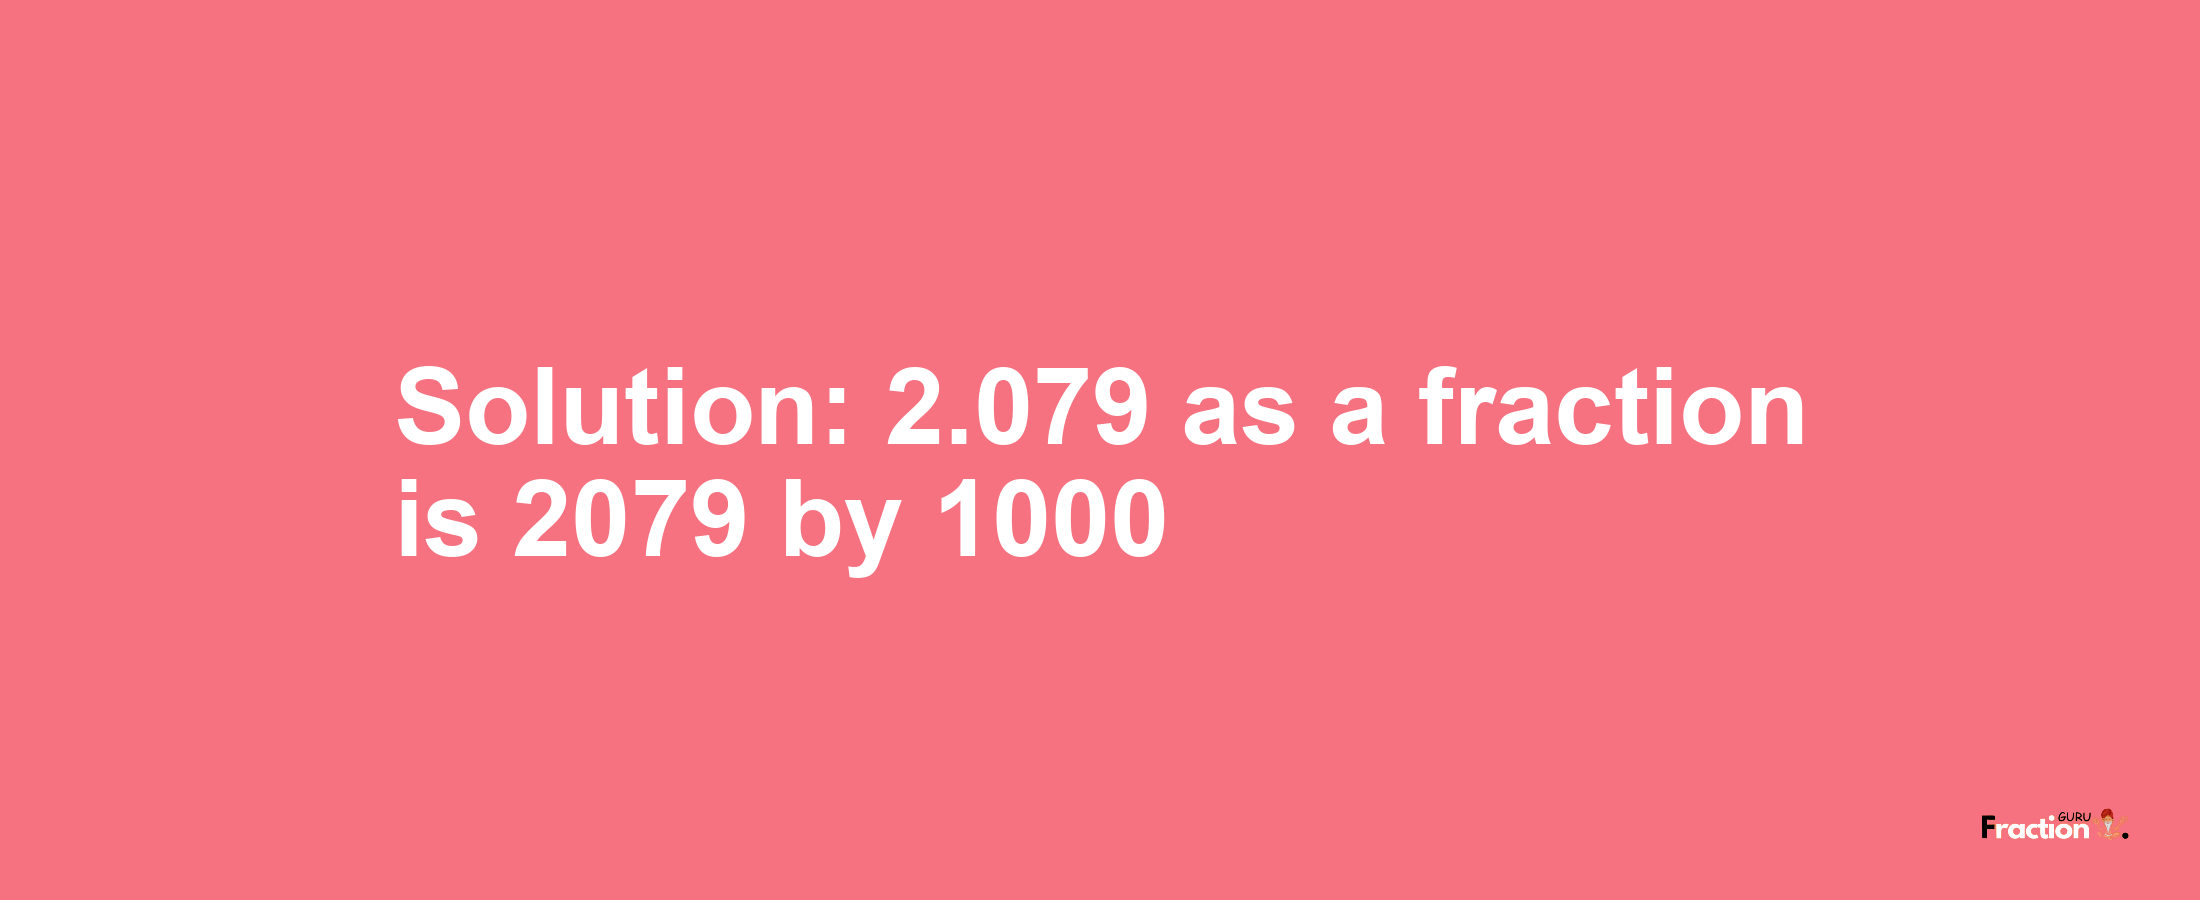 Solution:2.079 as a fraction is 2079/1000